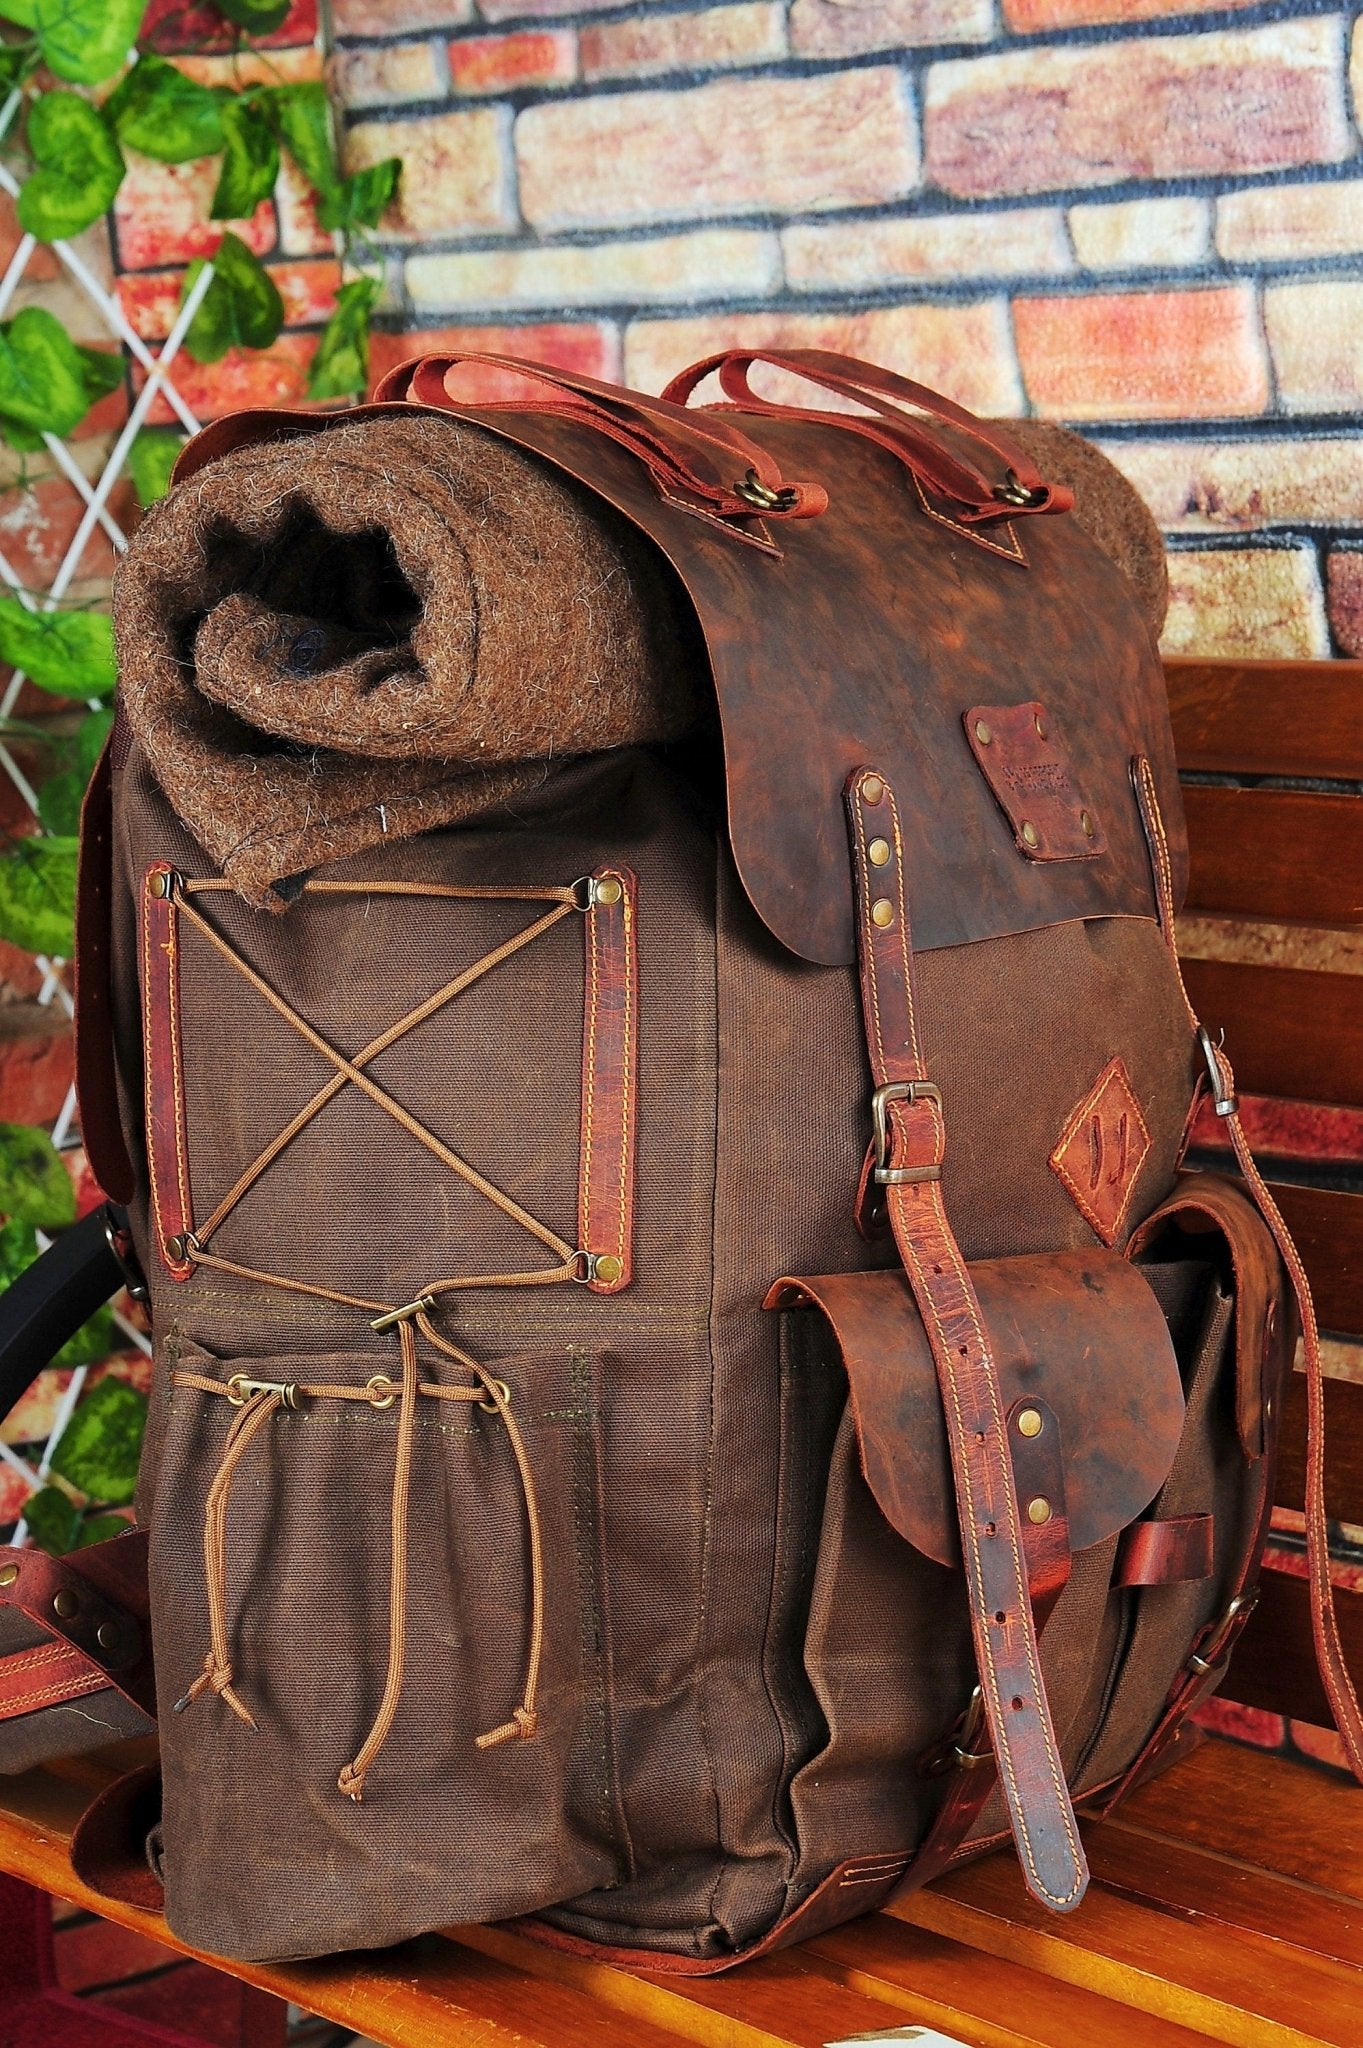 80L to 30L Size Options | Extra large | Handmade | Leather | Waxed Canvas Backpack | Camping, Hunting, Bushcraft, Travel | Personalization  99percenthandmade   